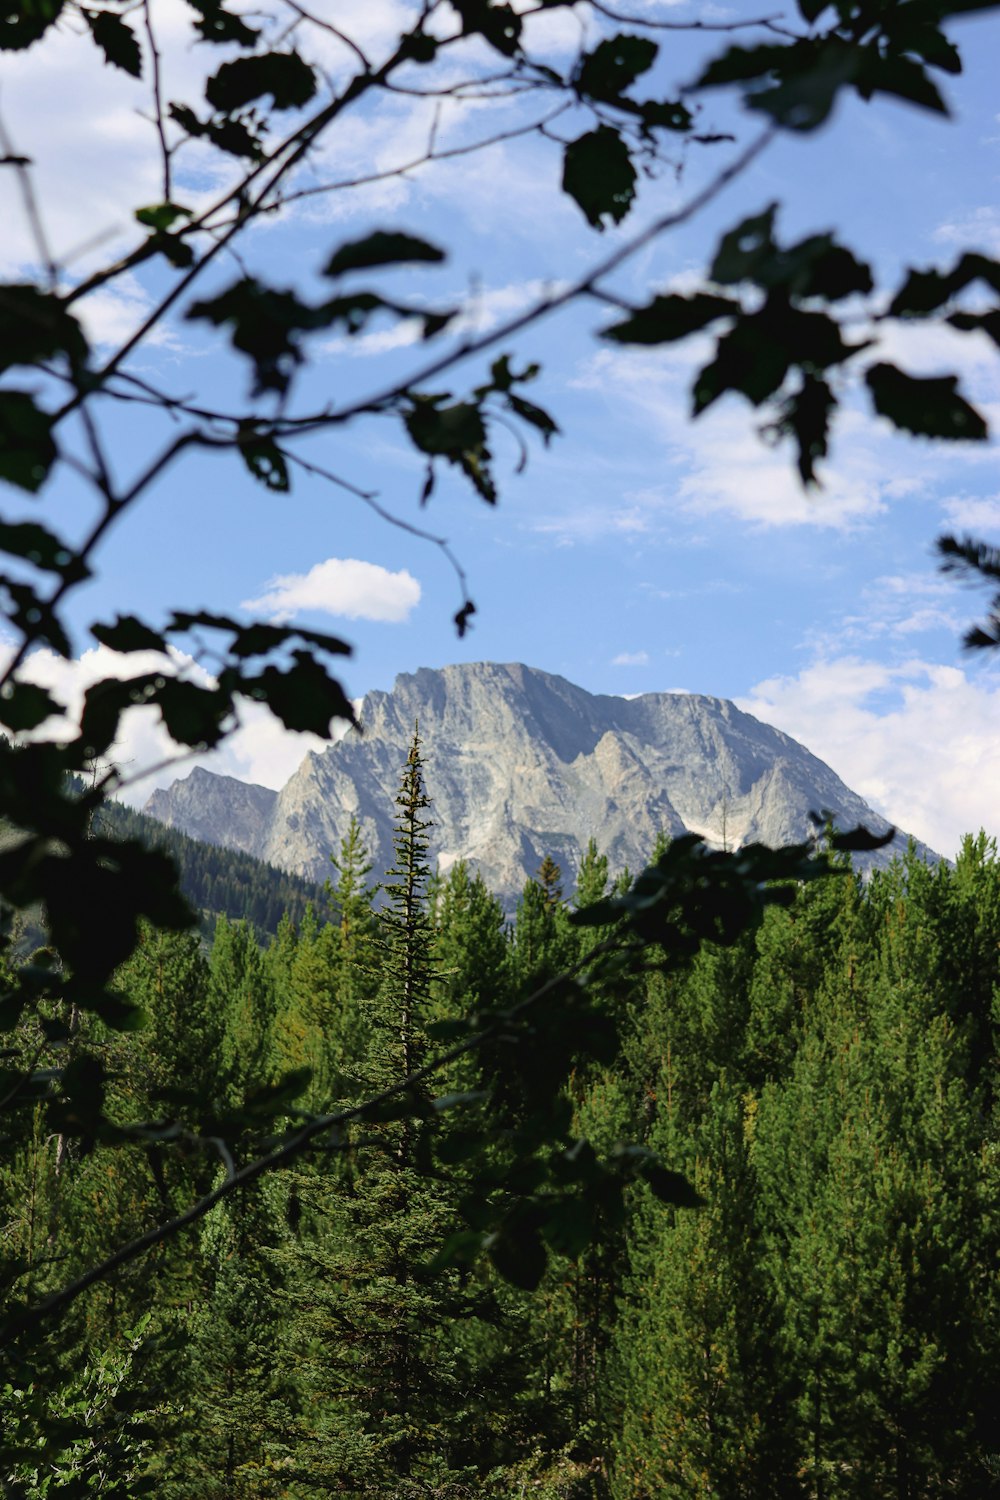 a mountain with trees and a snow covered mountain in the background